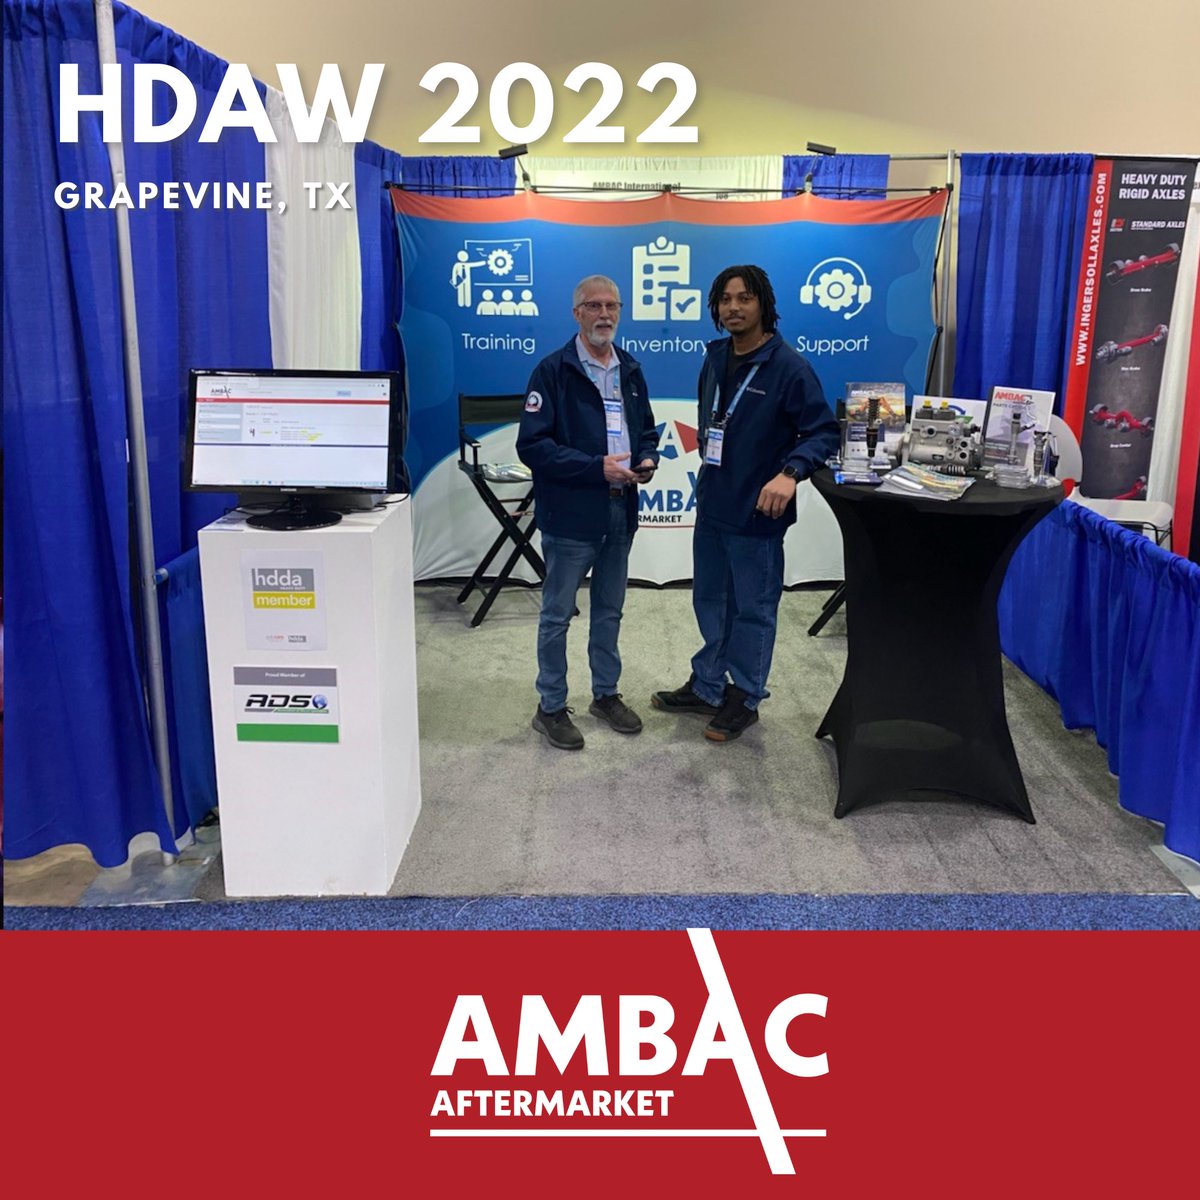 It's been a great week here at  @HDAWConference. We are looking forward to continuing the conversation with you all in the weeks to come!  #AMBAC's #HeavyDuty  #HDAW22